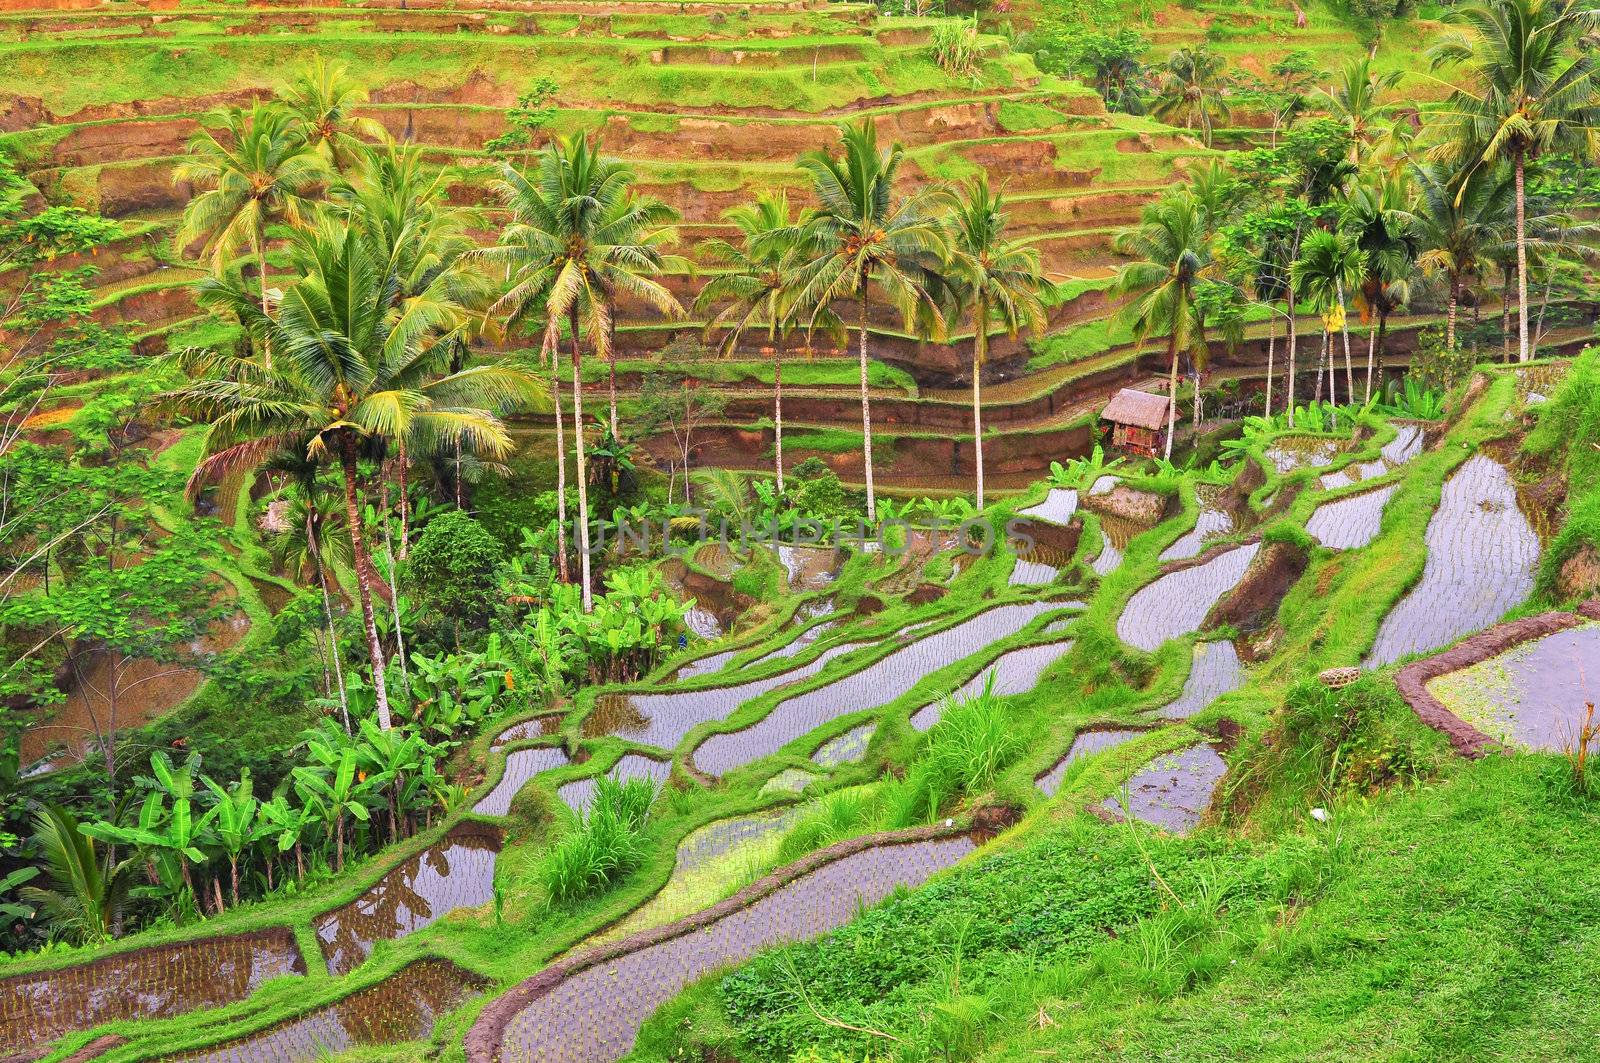 Balinese green rice fields terrace by martinm303